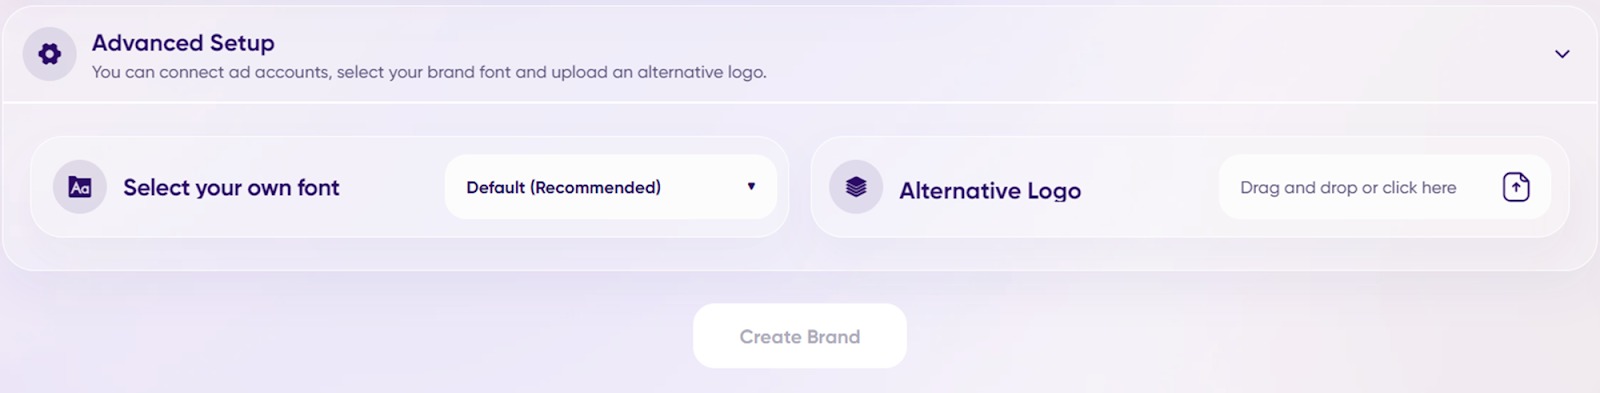 When creating a brand, use ‘Advanced Setup’ to add your own brand font, and upload an alternative logo.